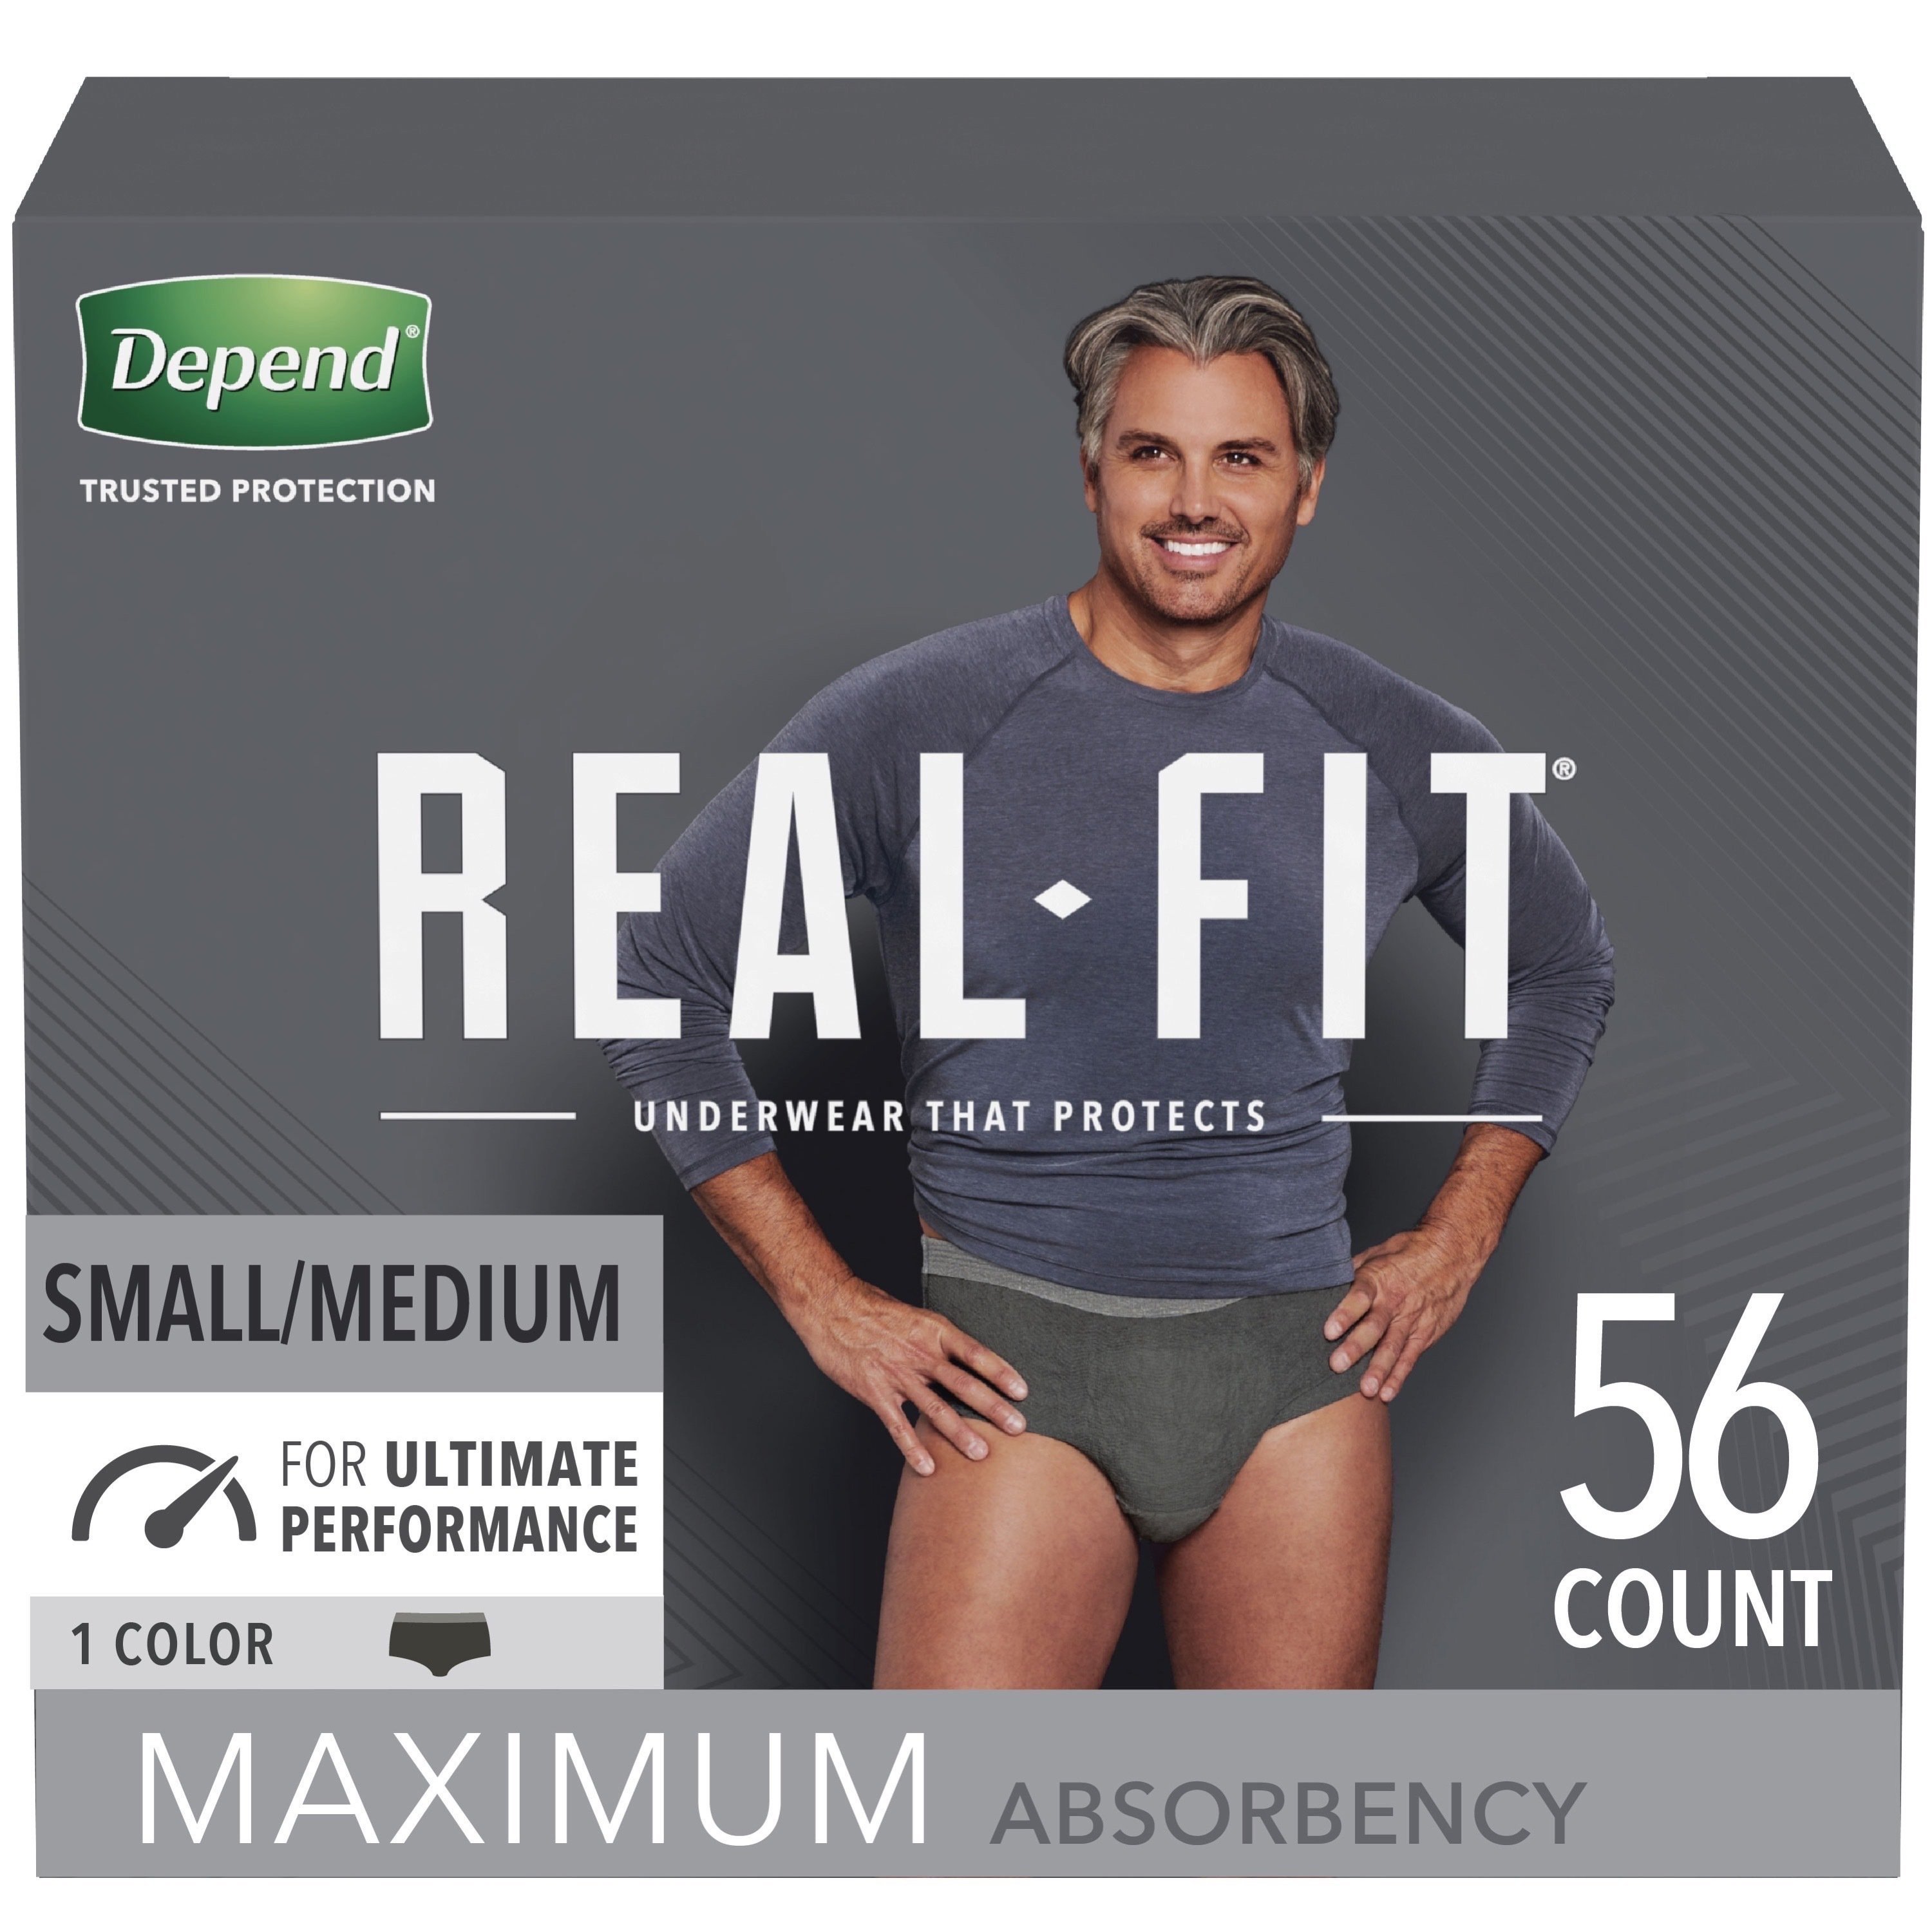 Depend Real Fit Incontinence Underwear for Men, Maximum Absorbency, Small/Medium, Black, 56 Ct (Pack of 2 | Total of 112 ct) - image 1 of 3